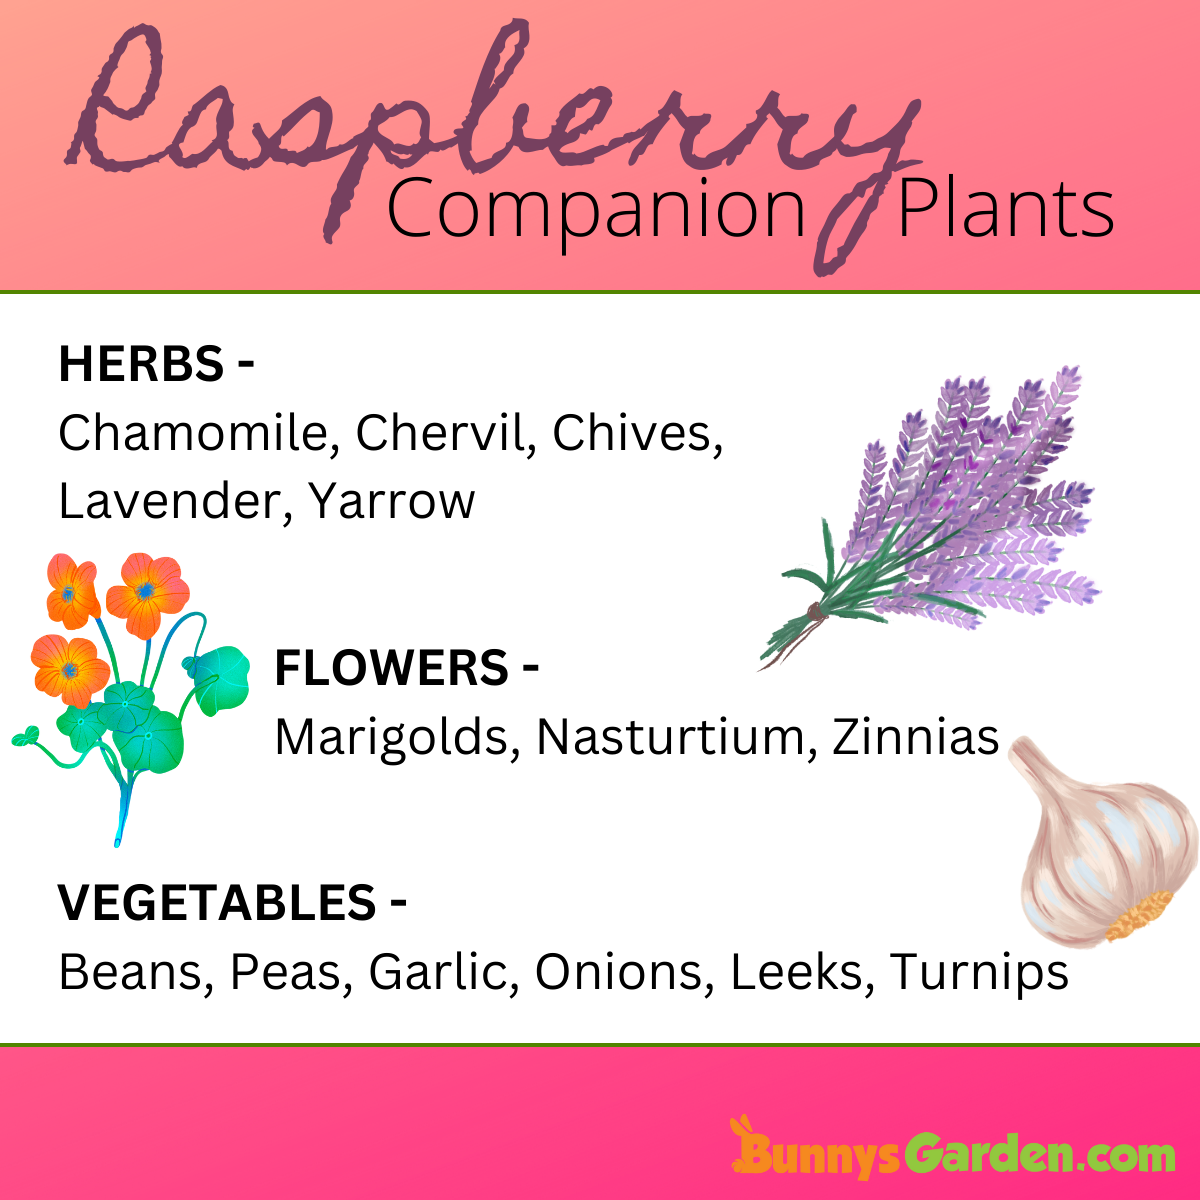 Companion plant ideas for raspberry bushes, including herbs, flowers, and vegetables